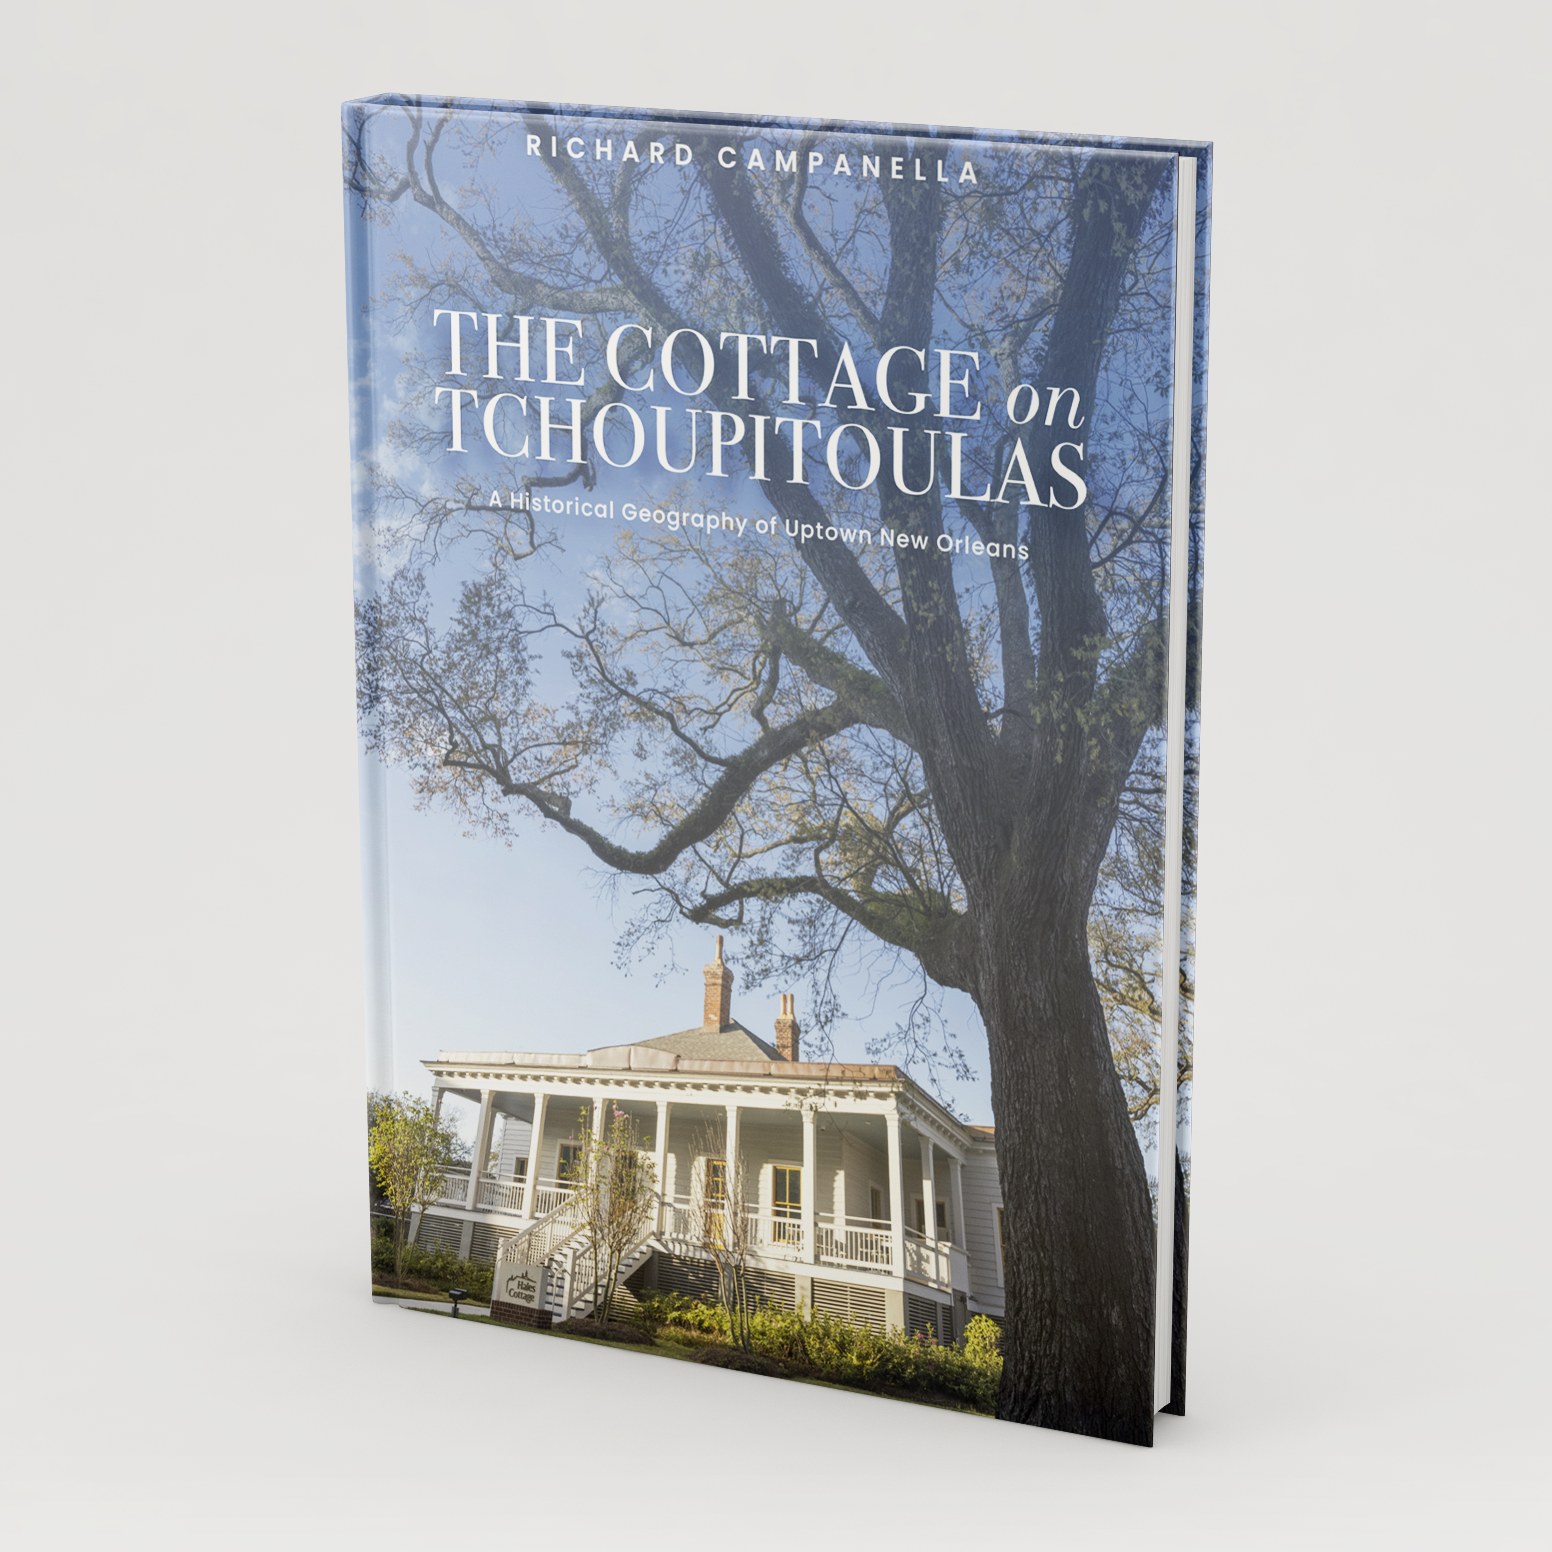 image of the book cover of The Cottage on Tchoupitoulas